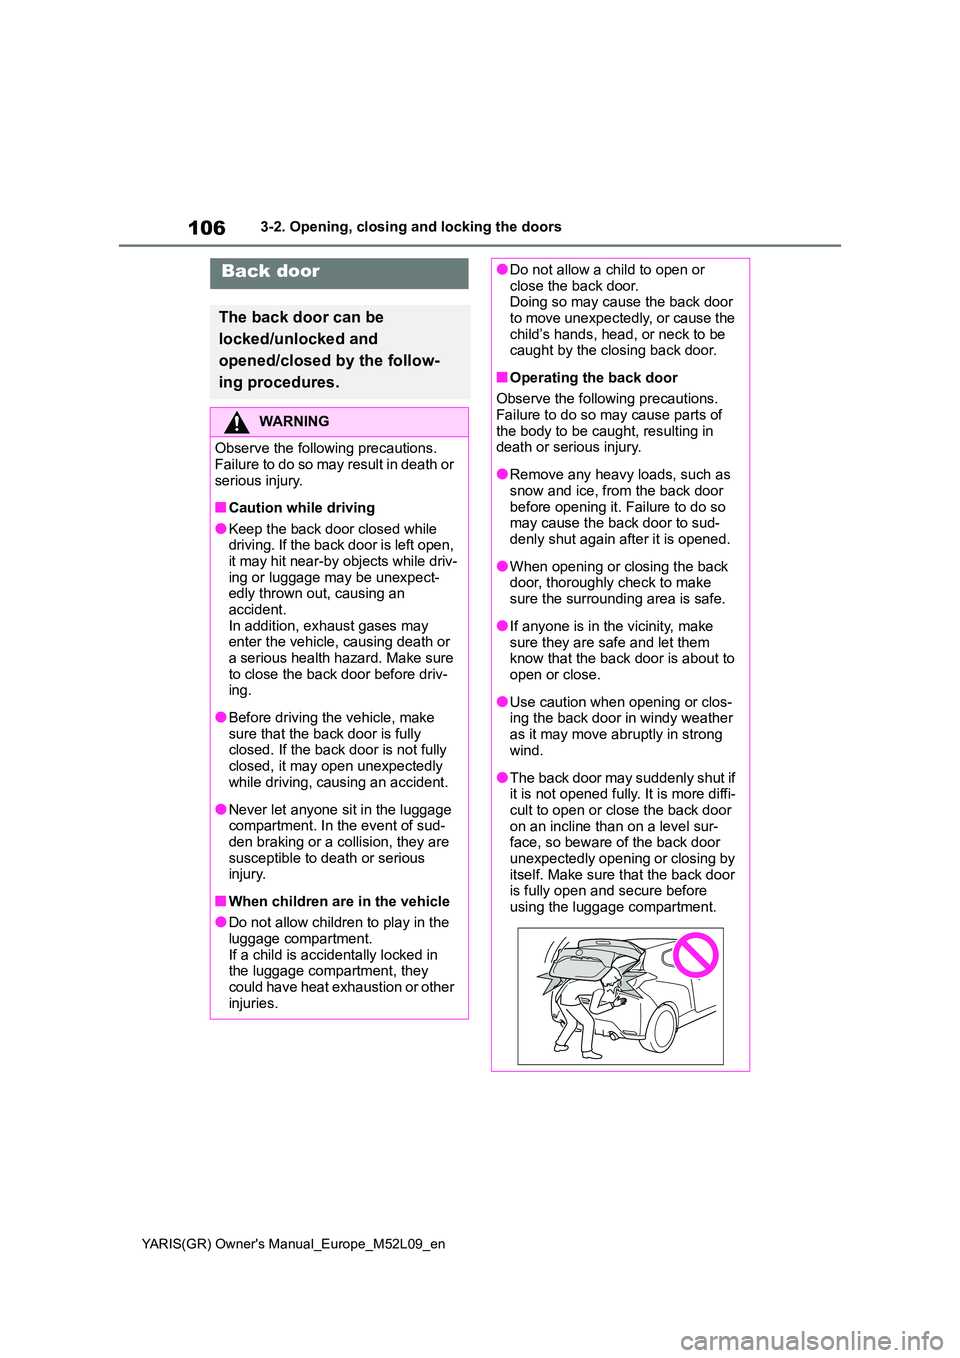 TOYOTA GR YARIS 2020  Owners Manual 106
YARIS(GR) Owners Manual_Europe_M52L09_en
3-2. Opening, closing and locking the doors
Back door
The back door can be  
locked/unlocked and  
opened/closed by the follow- 
ing procedures.
WARNING
O